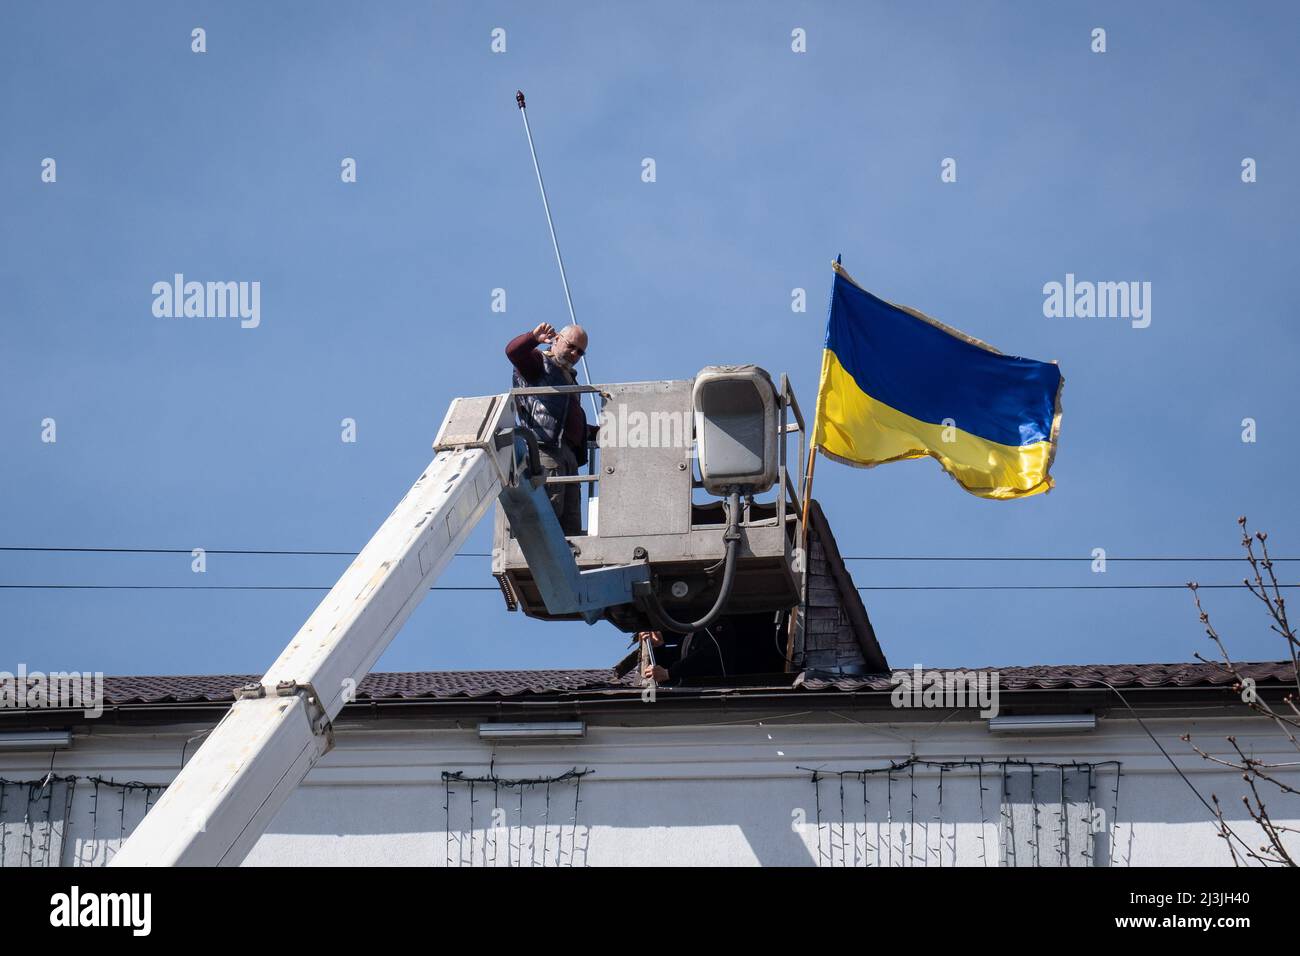 Bucha, Ukraine. 07th Apr, 2022. A man raising up the Ukrainian National Flag in Bucha City Council at Bucha, Kyiv Oblast. Following the recapture of Bucha by the Ukrainian forces, the city was devastated under intense fighting and shelling, as the Russian forces are said to have killed hundreds of civilians in the town. (Photo by Alex Chan Tsz Yuk/SOPA Images/Sipa USA) Credit: Sipa USA/Alamy Live News Stock Photo